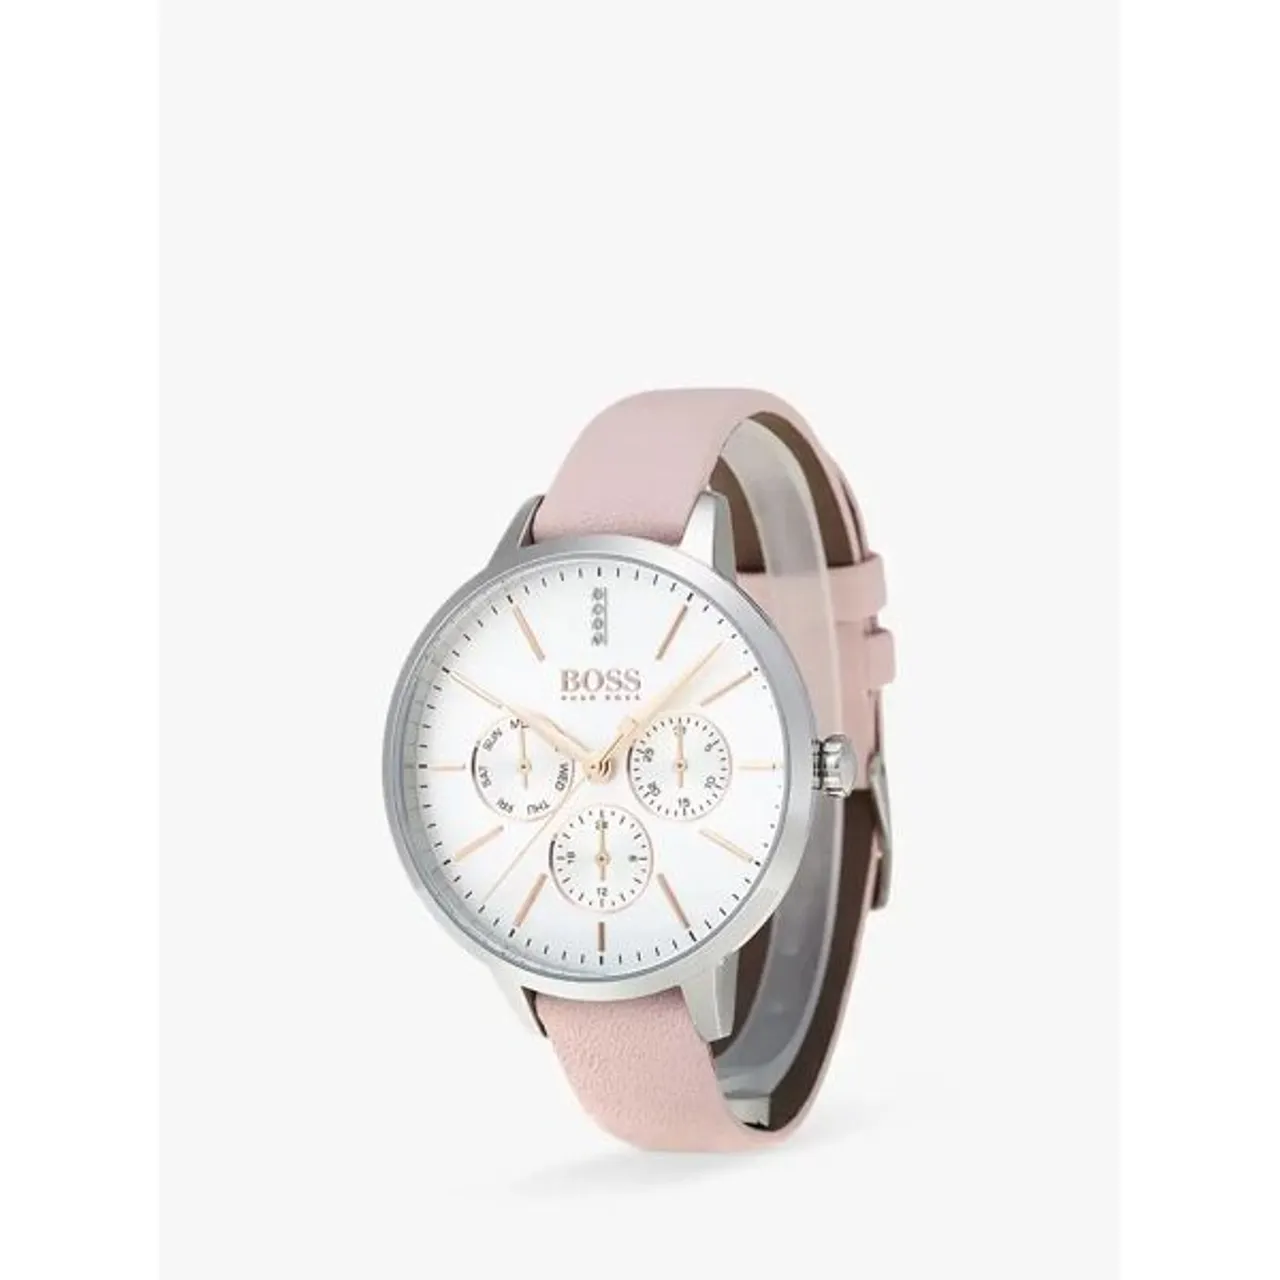 Hugo Boss BOSS 1502419 Women's Symphony Day Date Chronograph Leather Strap Watch, Pink/White - Pink/Silver 1502419 - Female